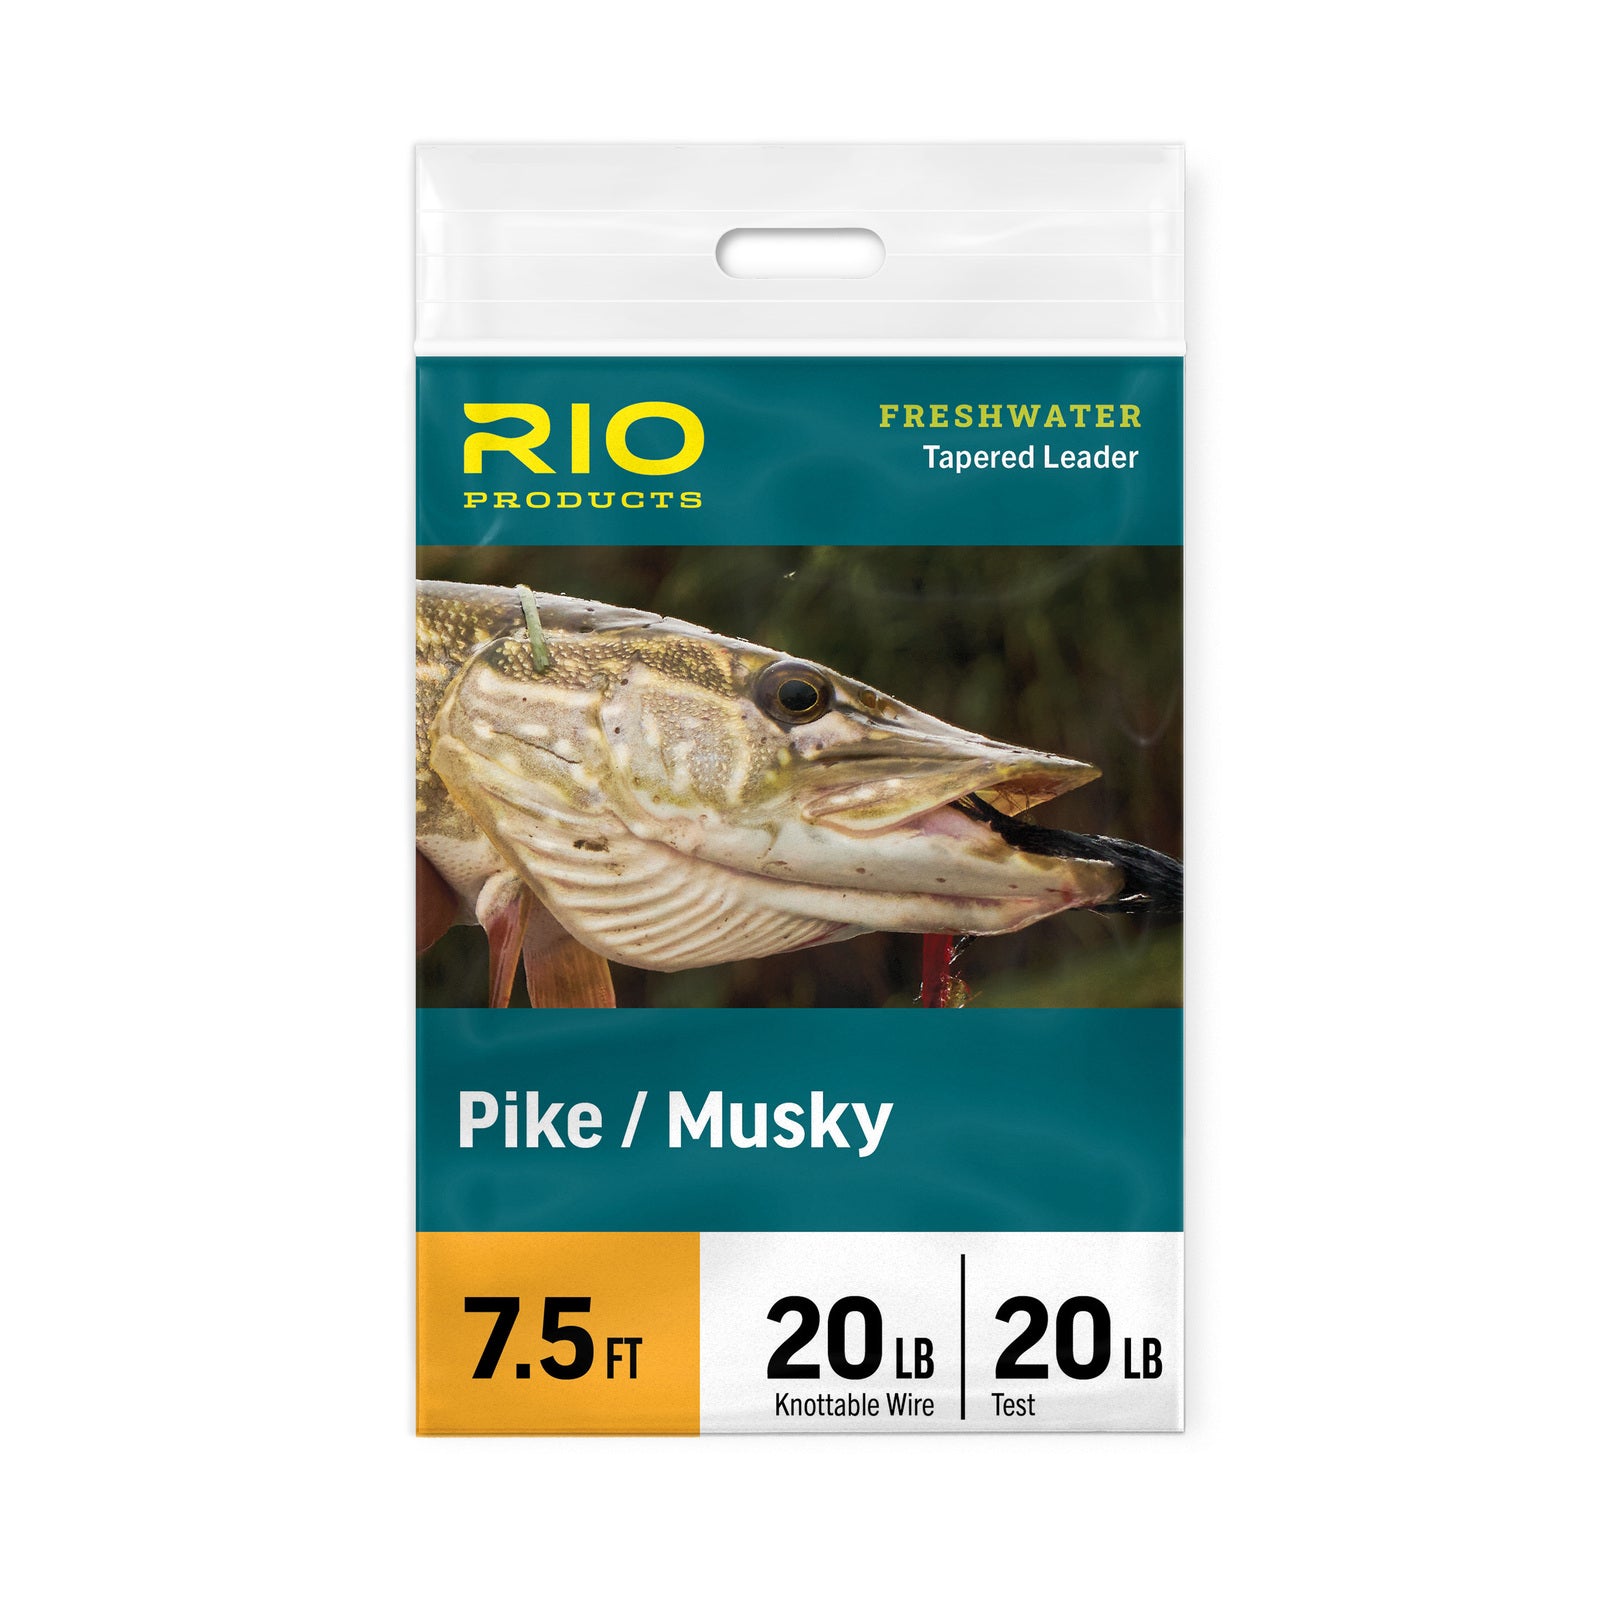 RIO Saltwater Toothy Critter Leader